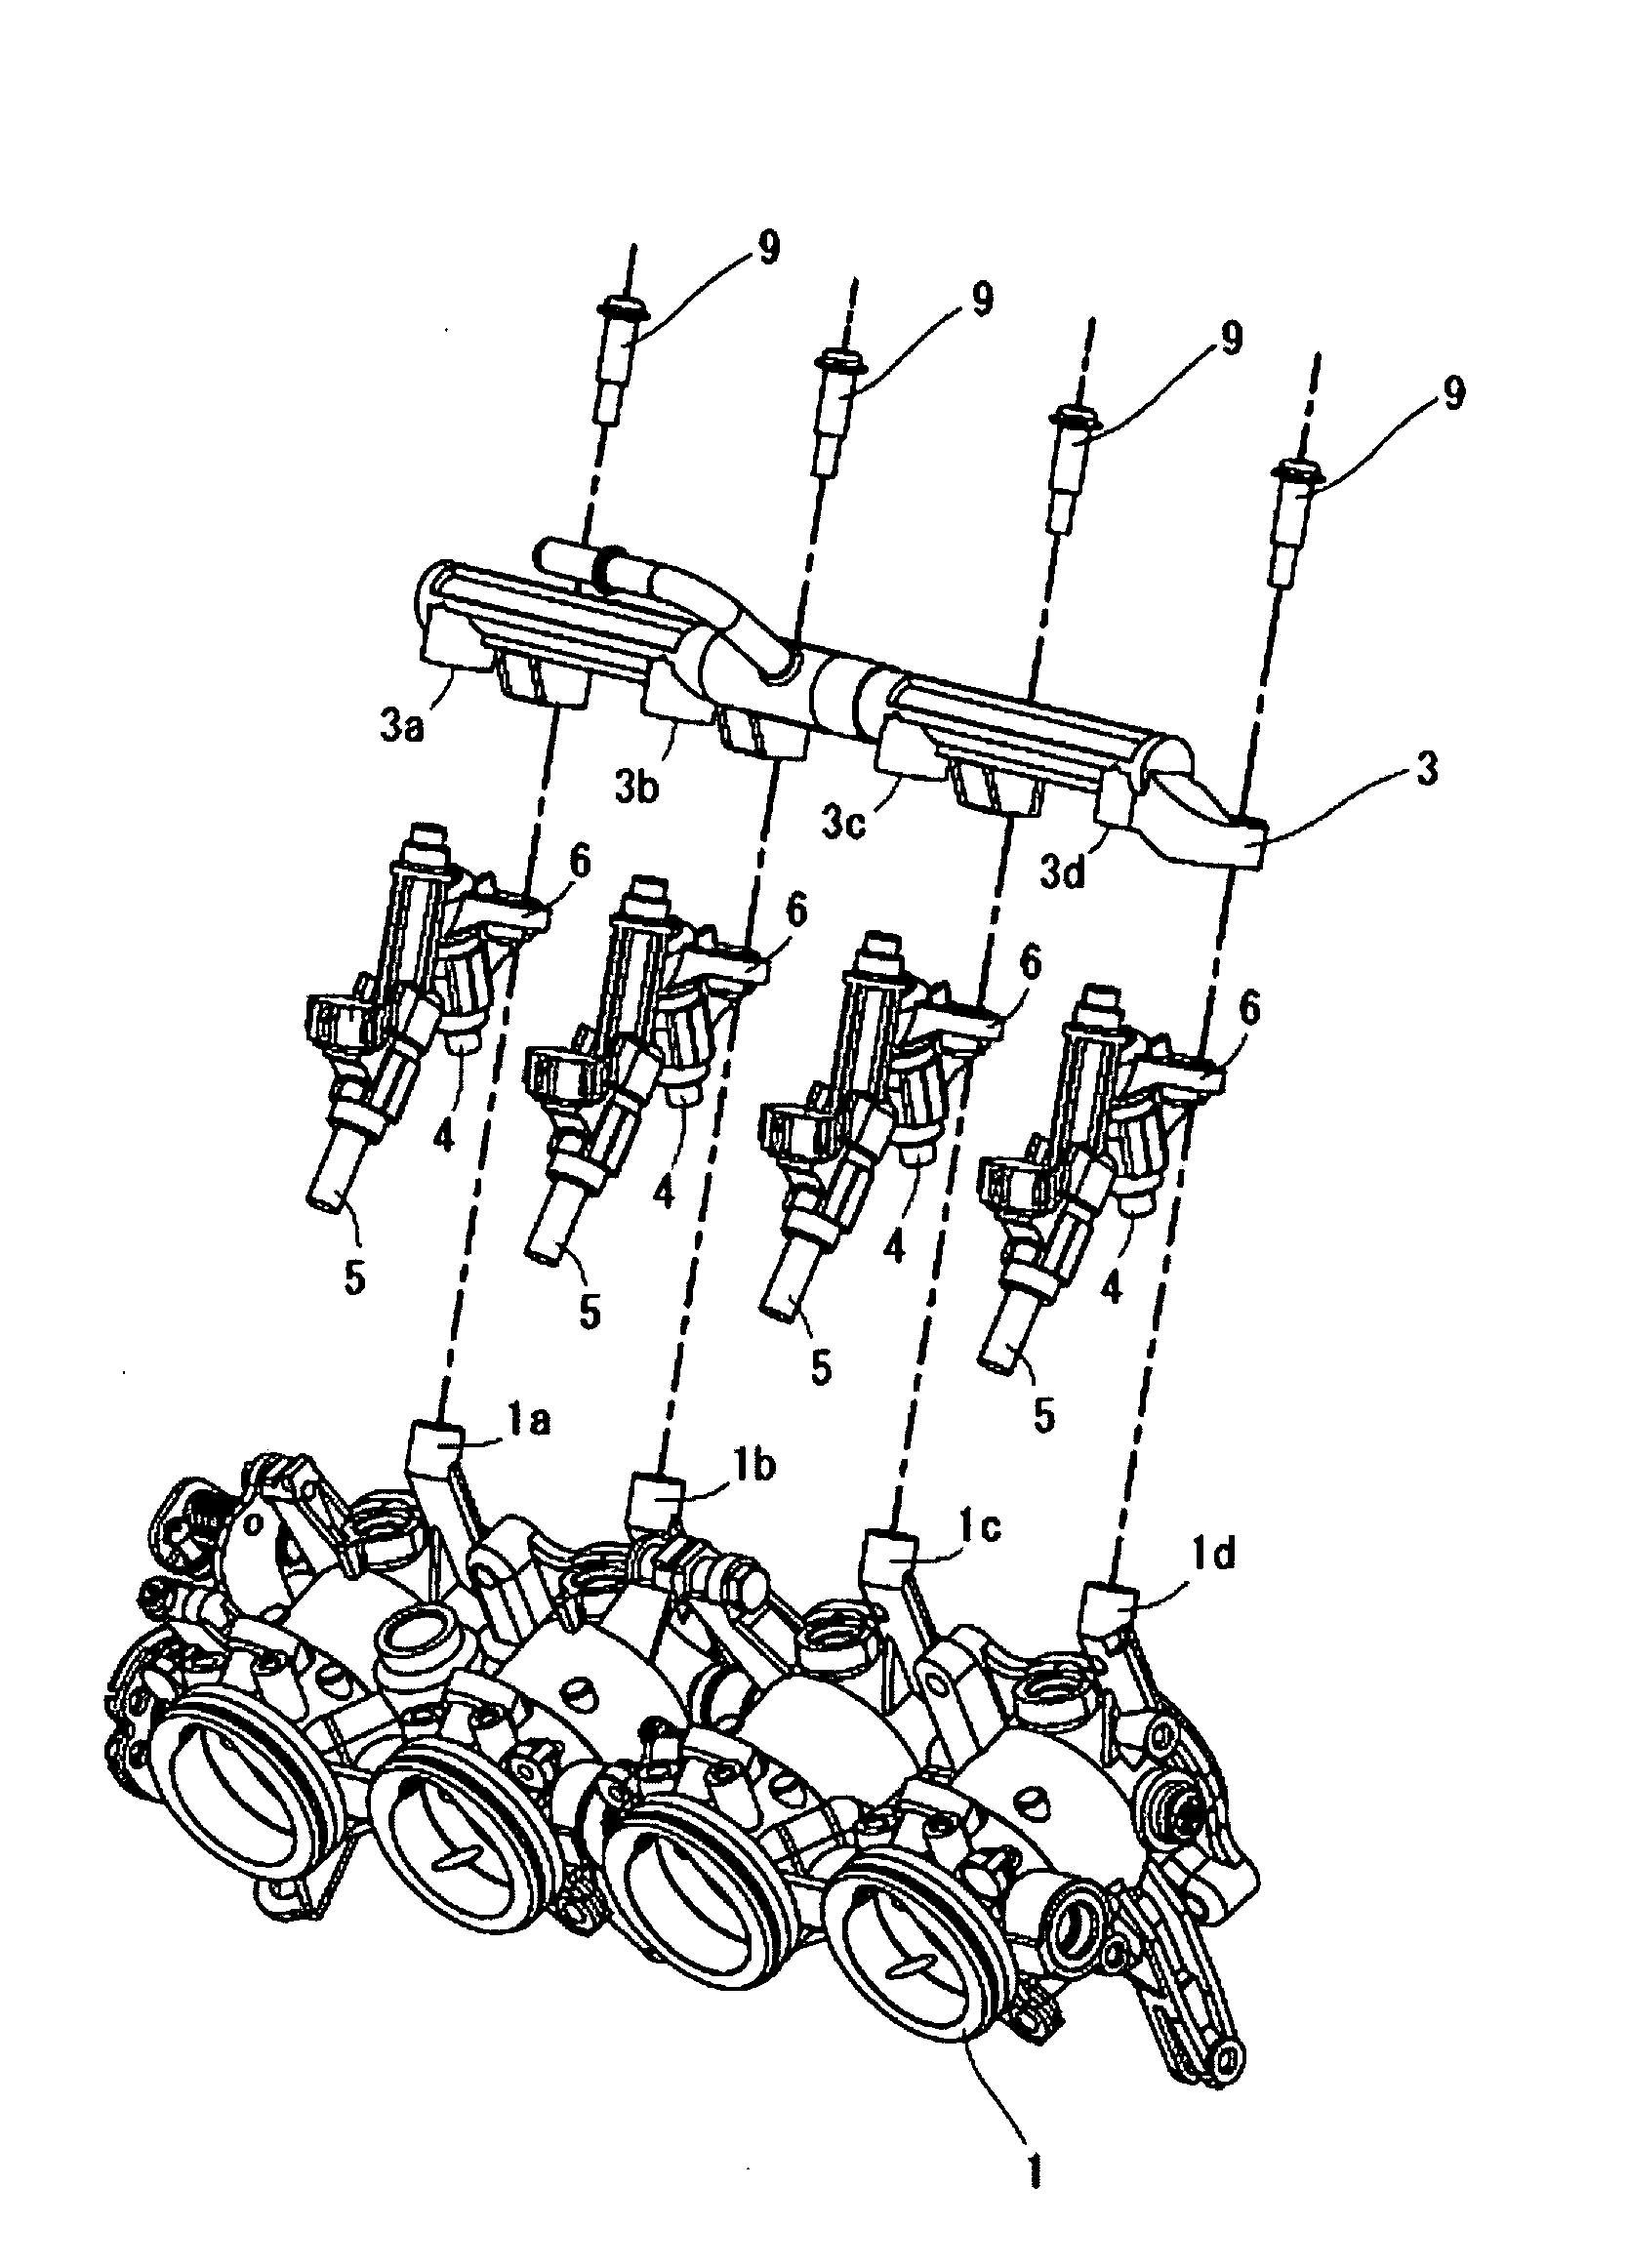 Fuel injection apparatus